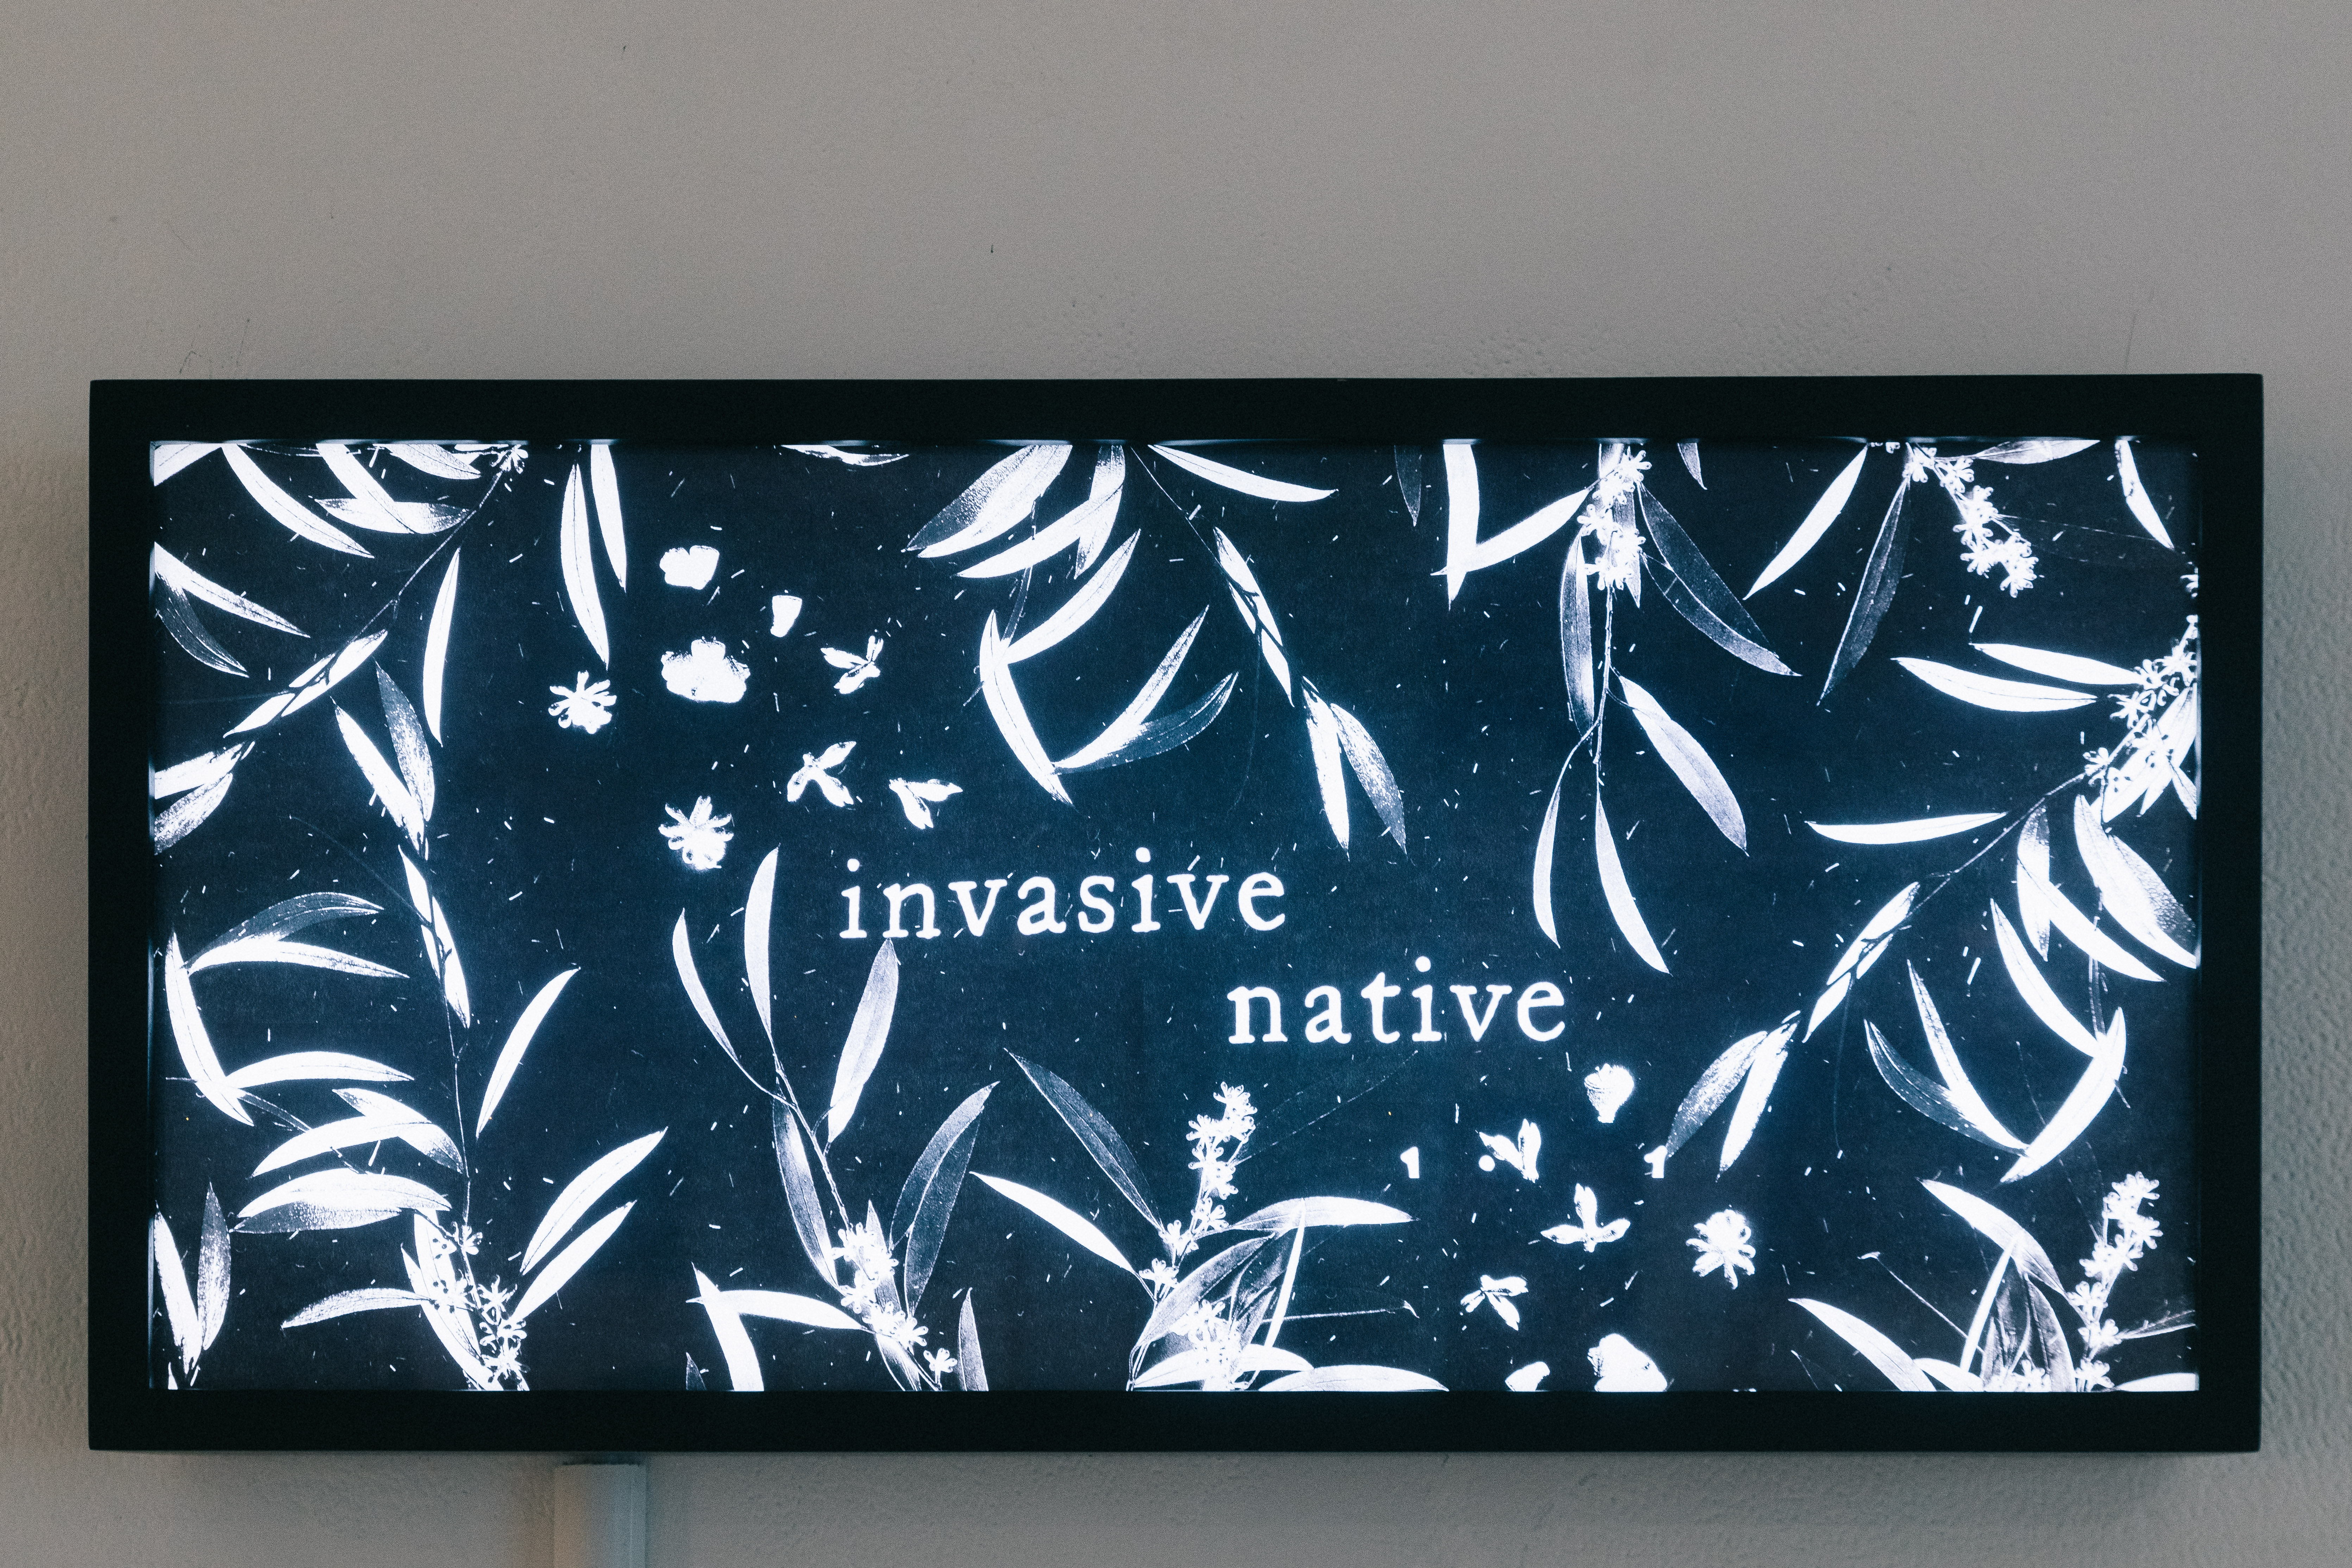 A monochrome lightbox artwork. Text on the artwork says archival survival surrounded by imagery of leaves and flora.